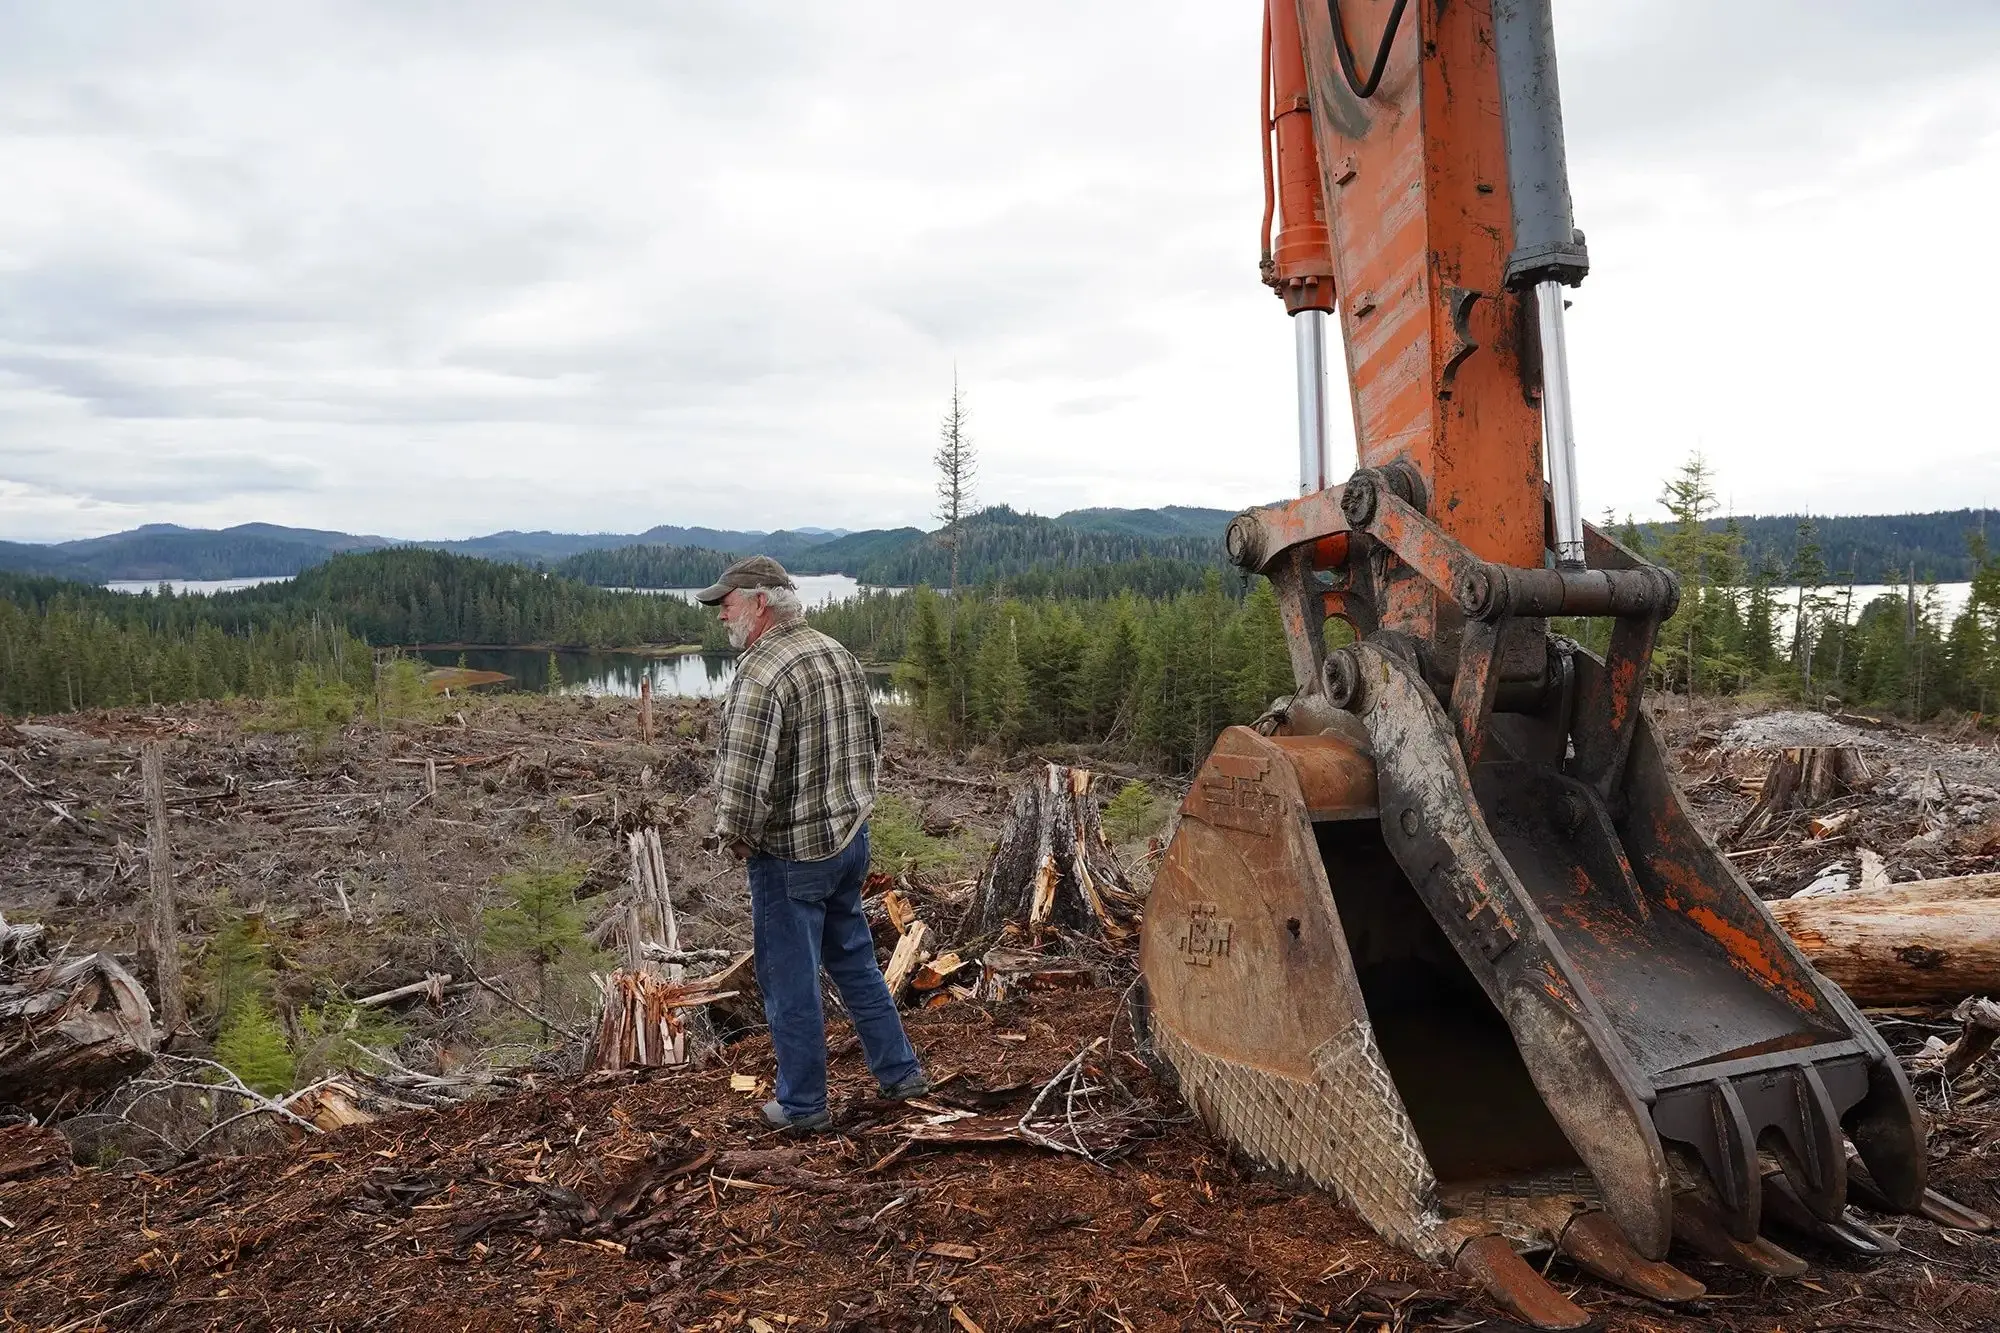 A man looks on as construction machines clear a forested area in Alaska.